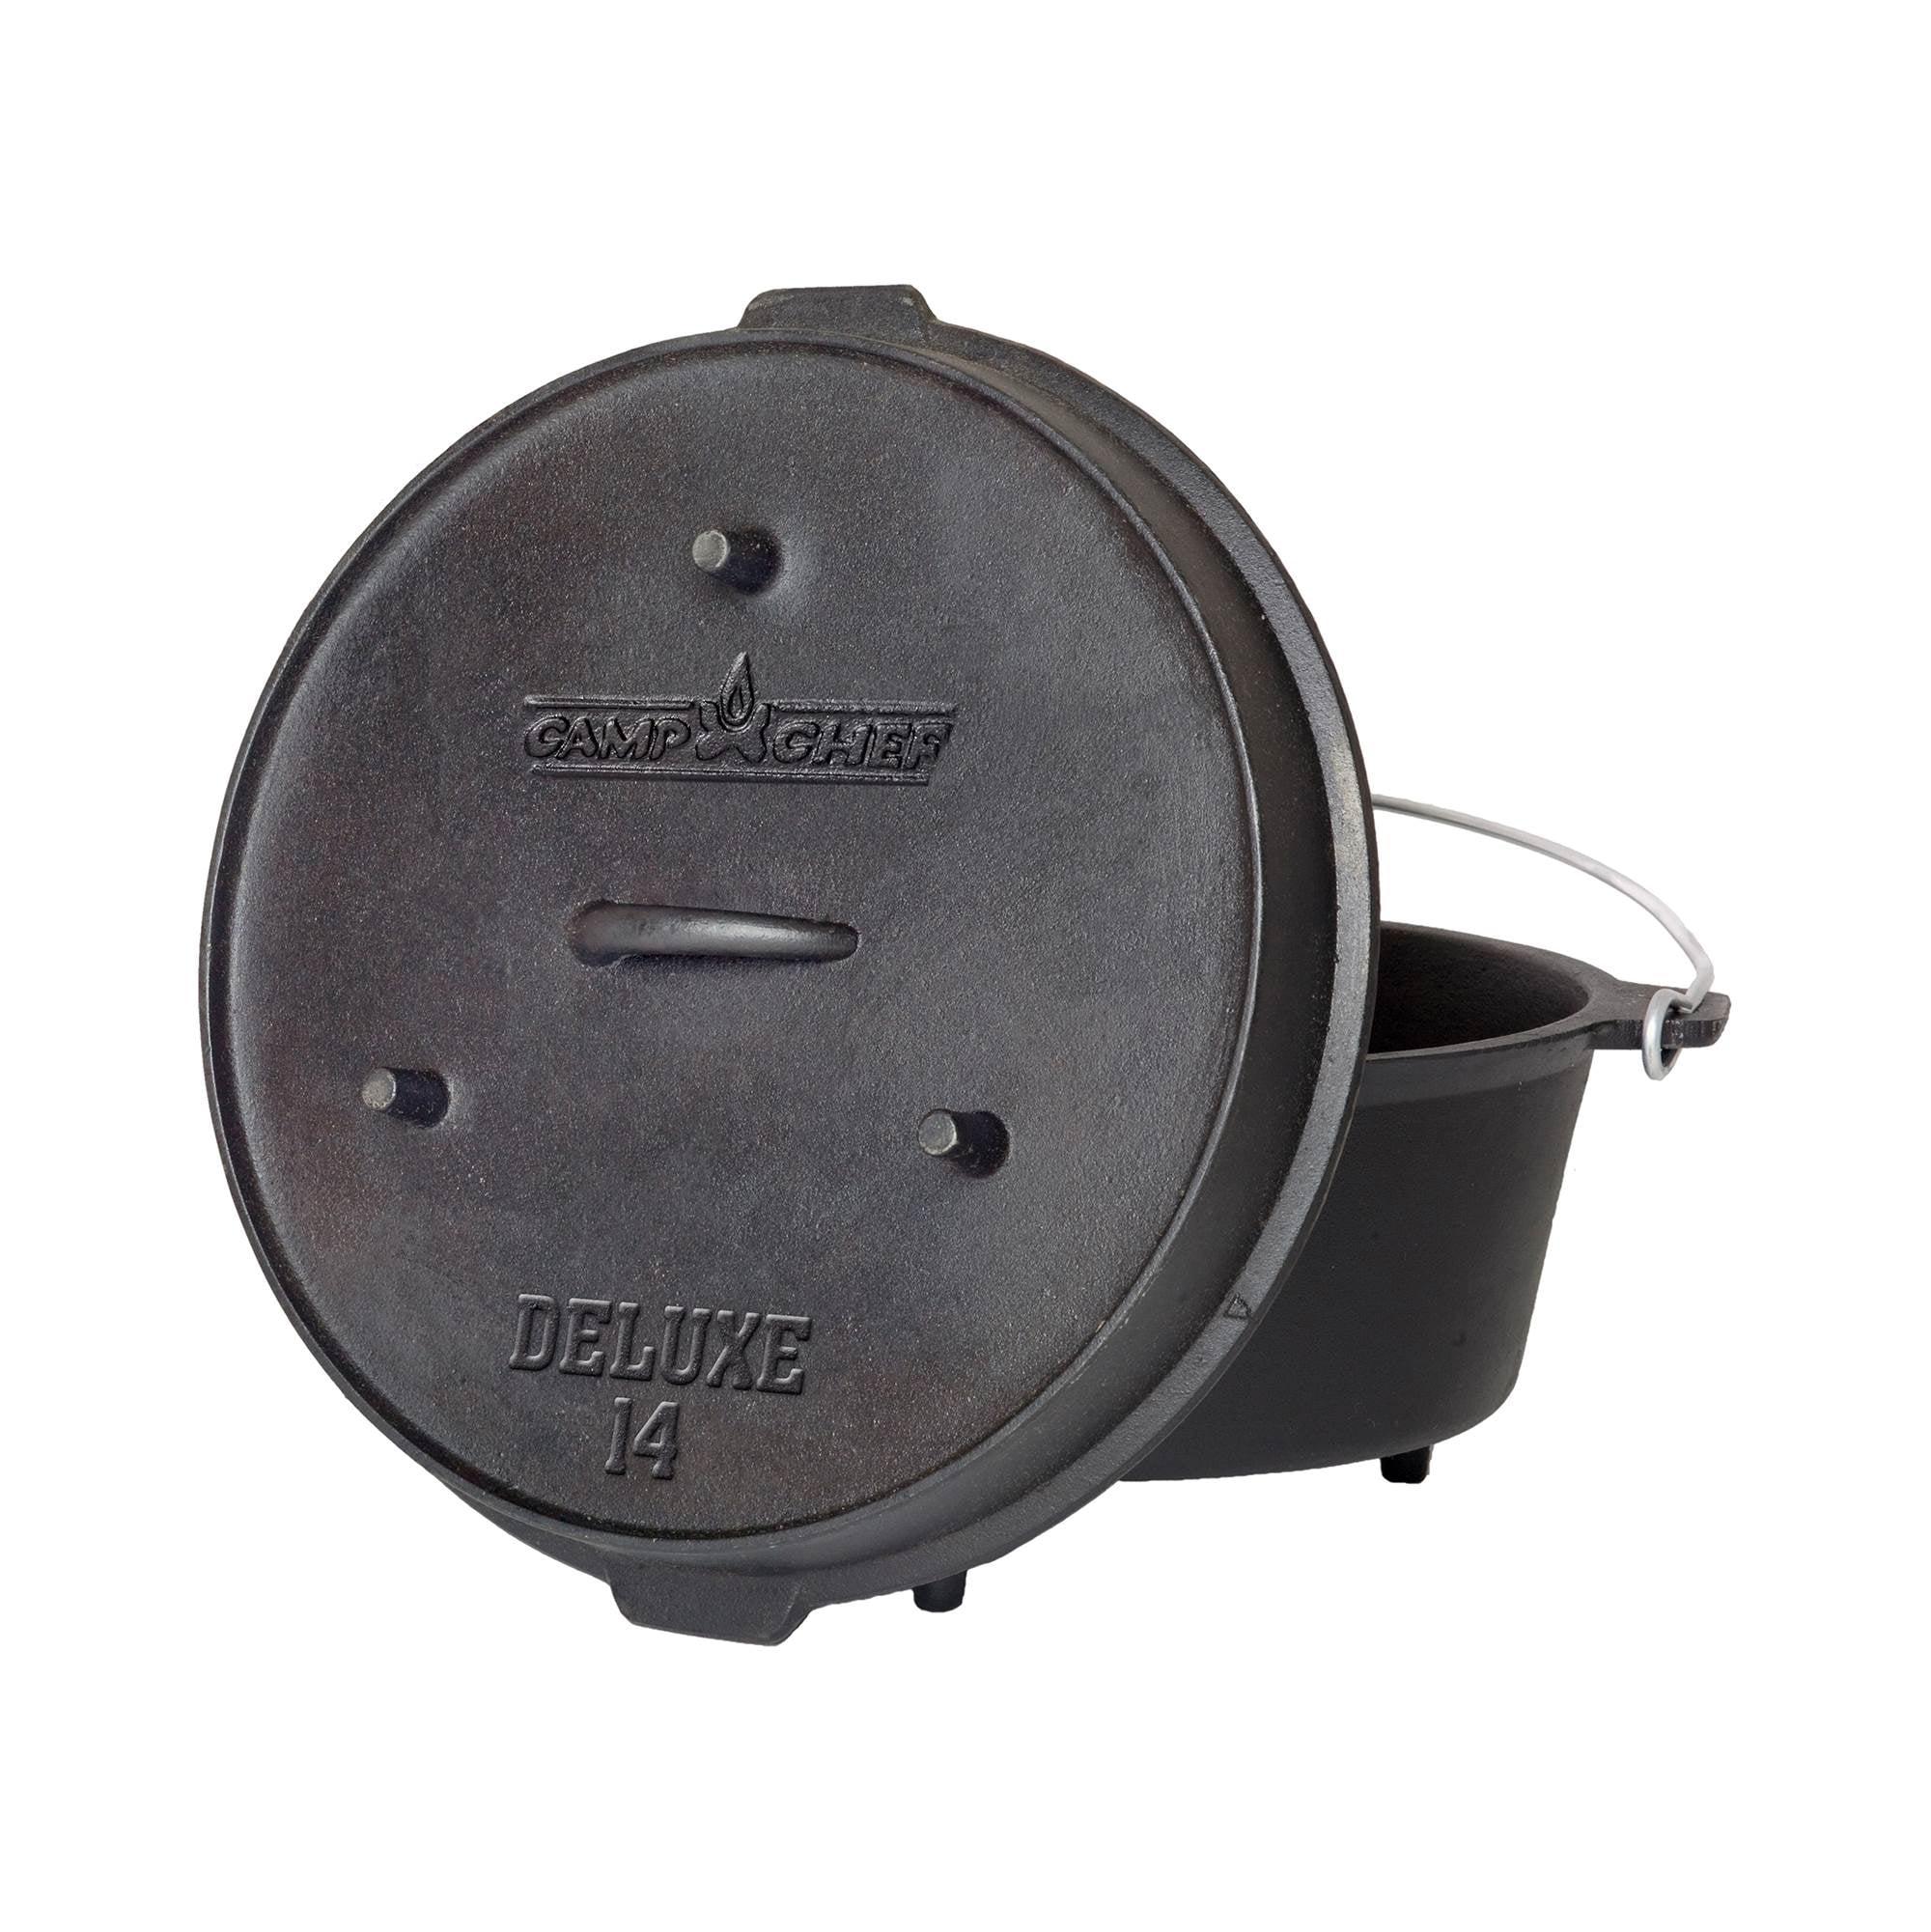 Deluxe 12-Quart Cast Iron Dutch Oven with Built-in Thermometer